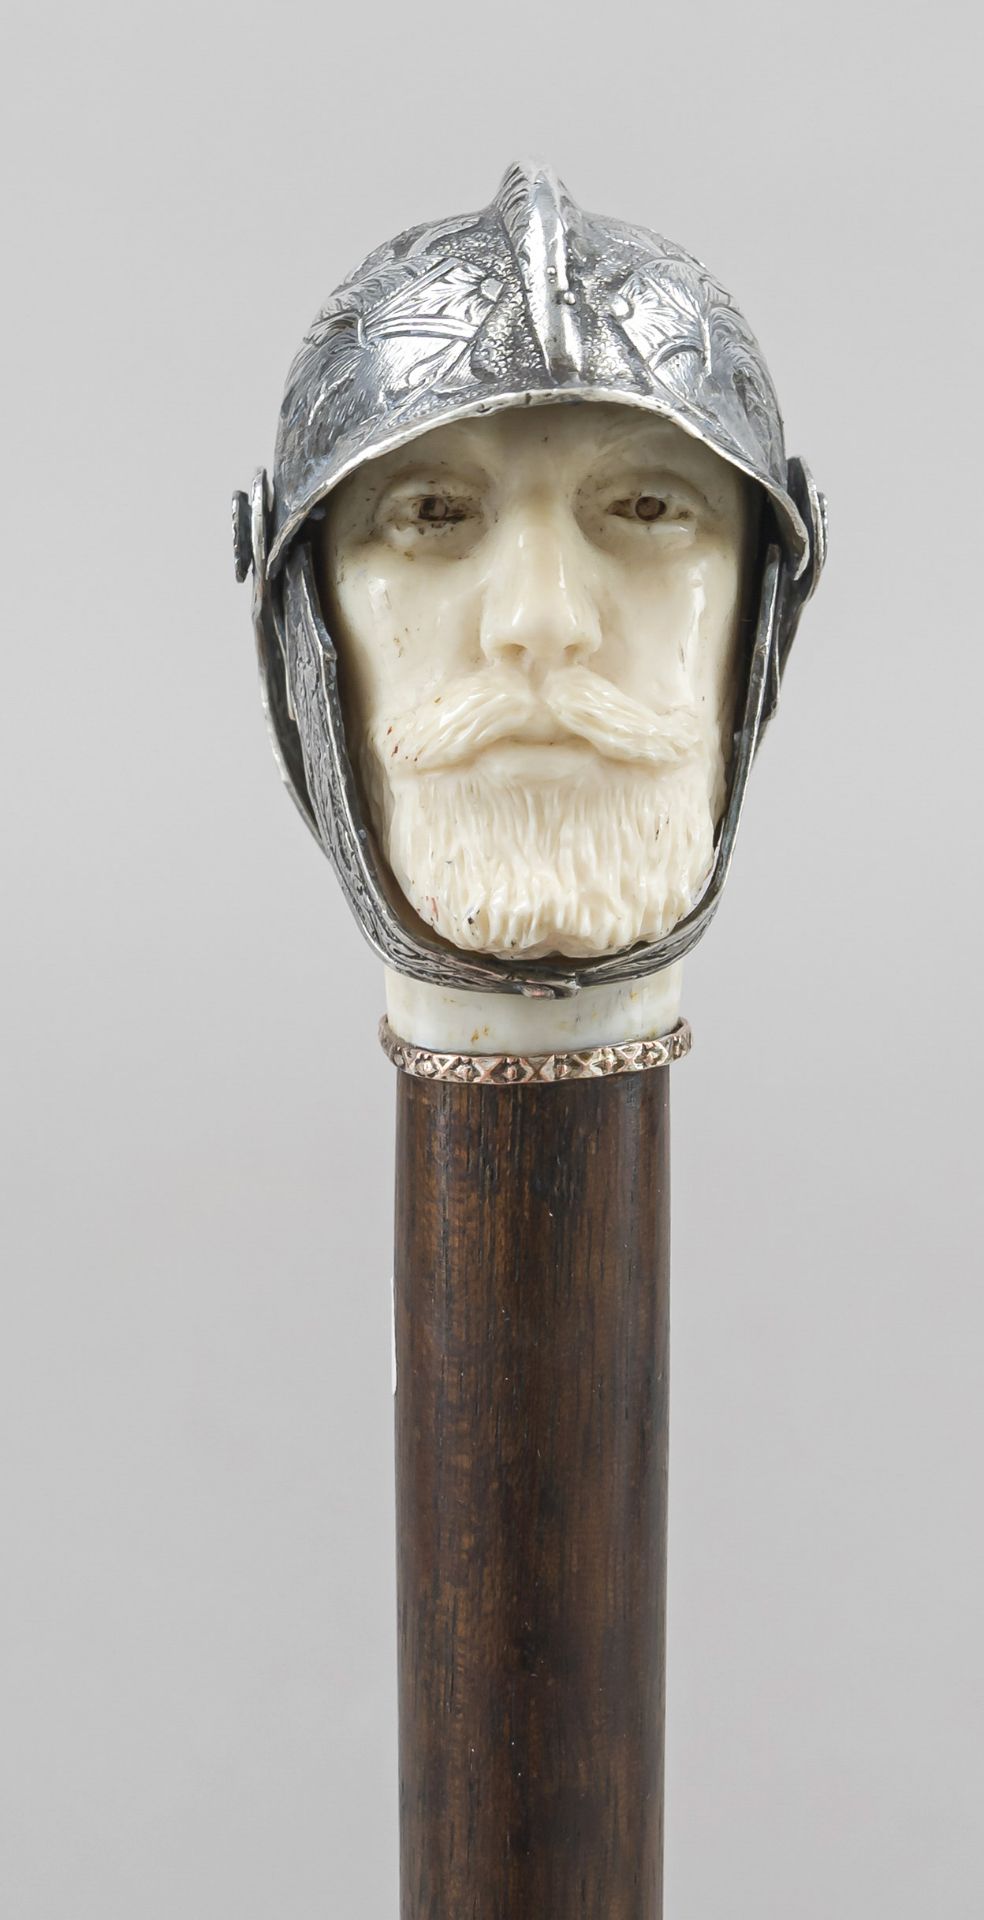 Walking stick, c. 1900, figural pommel in the shape of a soldier's head, leg with silver helmet, - Image 2 of 3